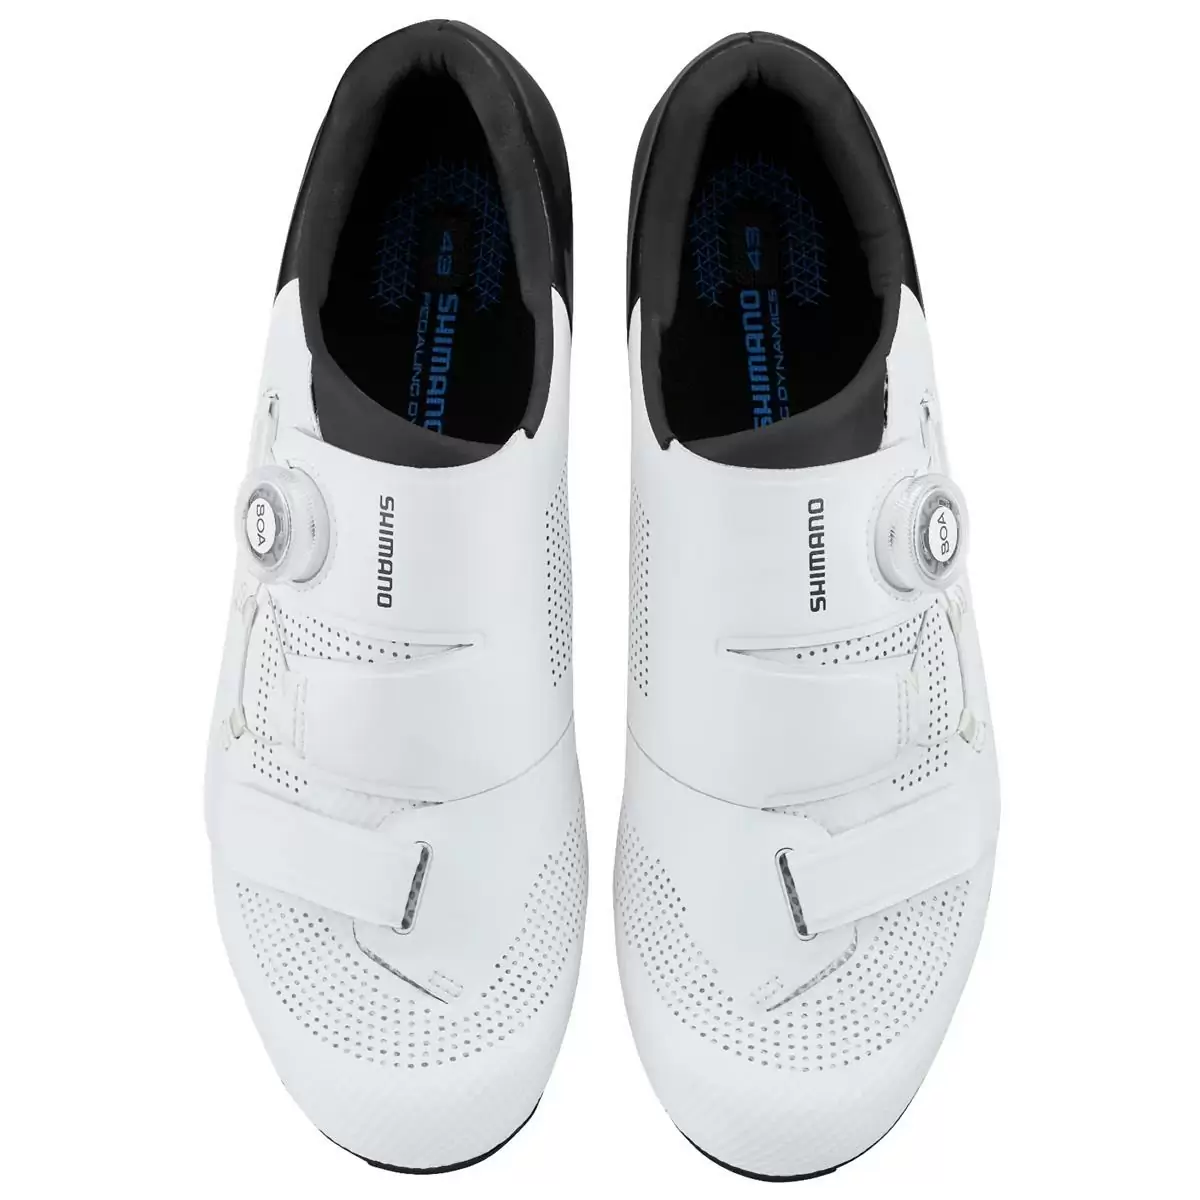 Chaussures route RC SH-RC502 Blanc taille 43 #1